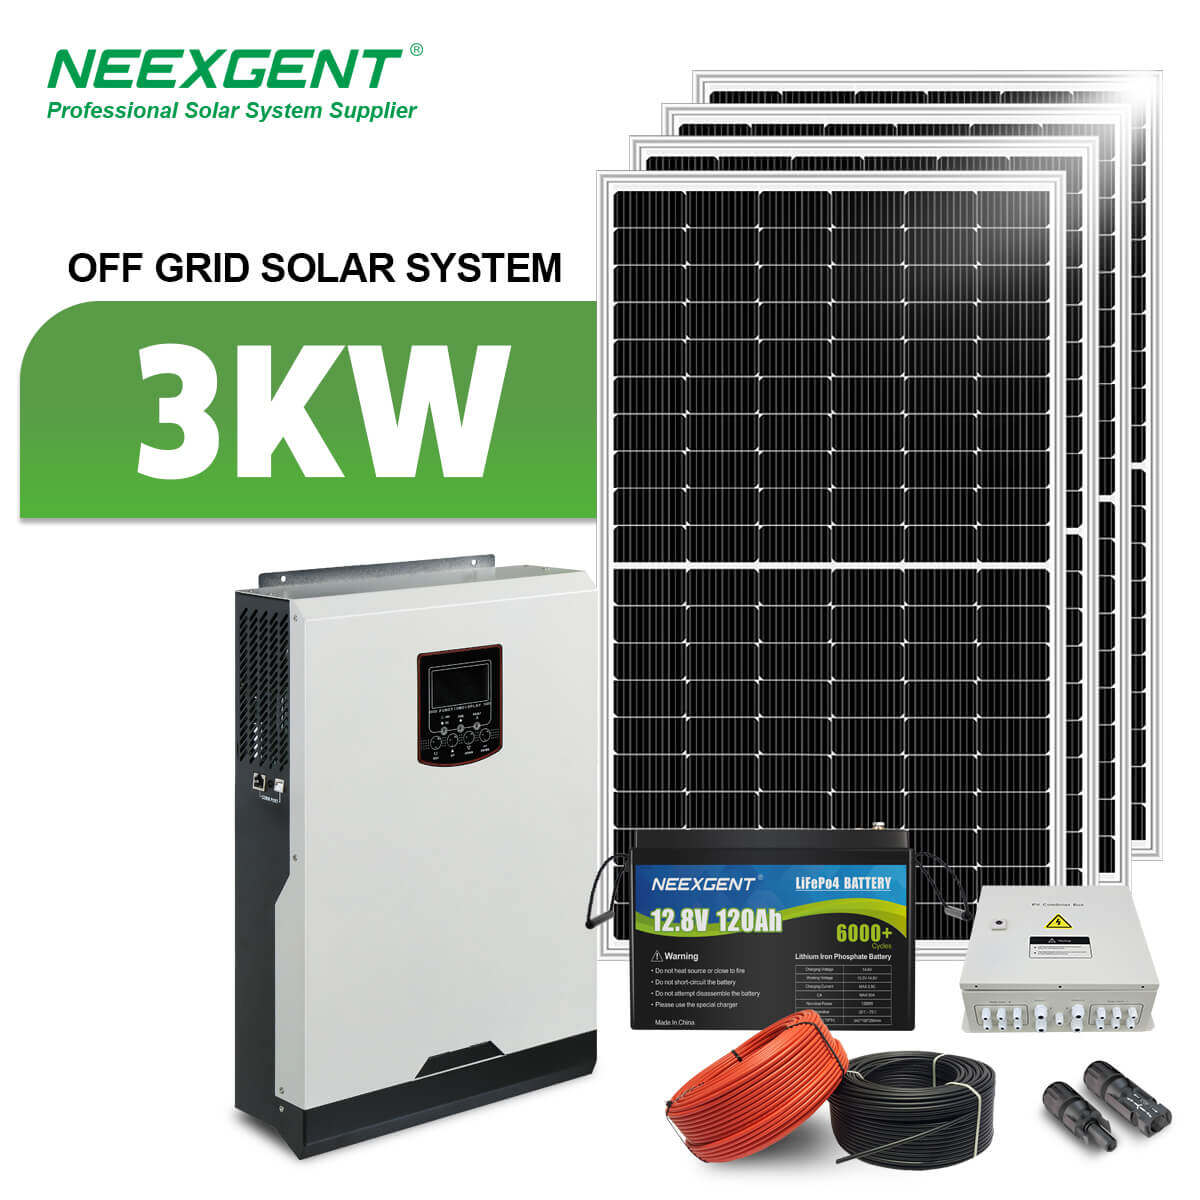 Neexgent Complete Solar Mounting System Roof 3kw Off Grid Solar System Kit For Houses